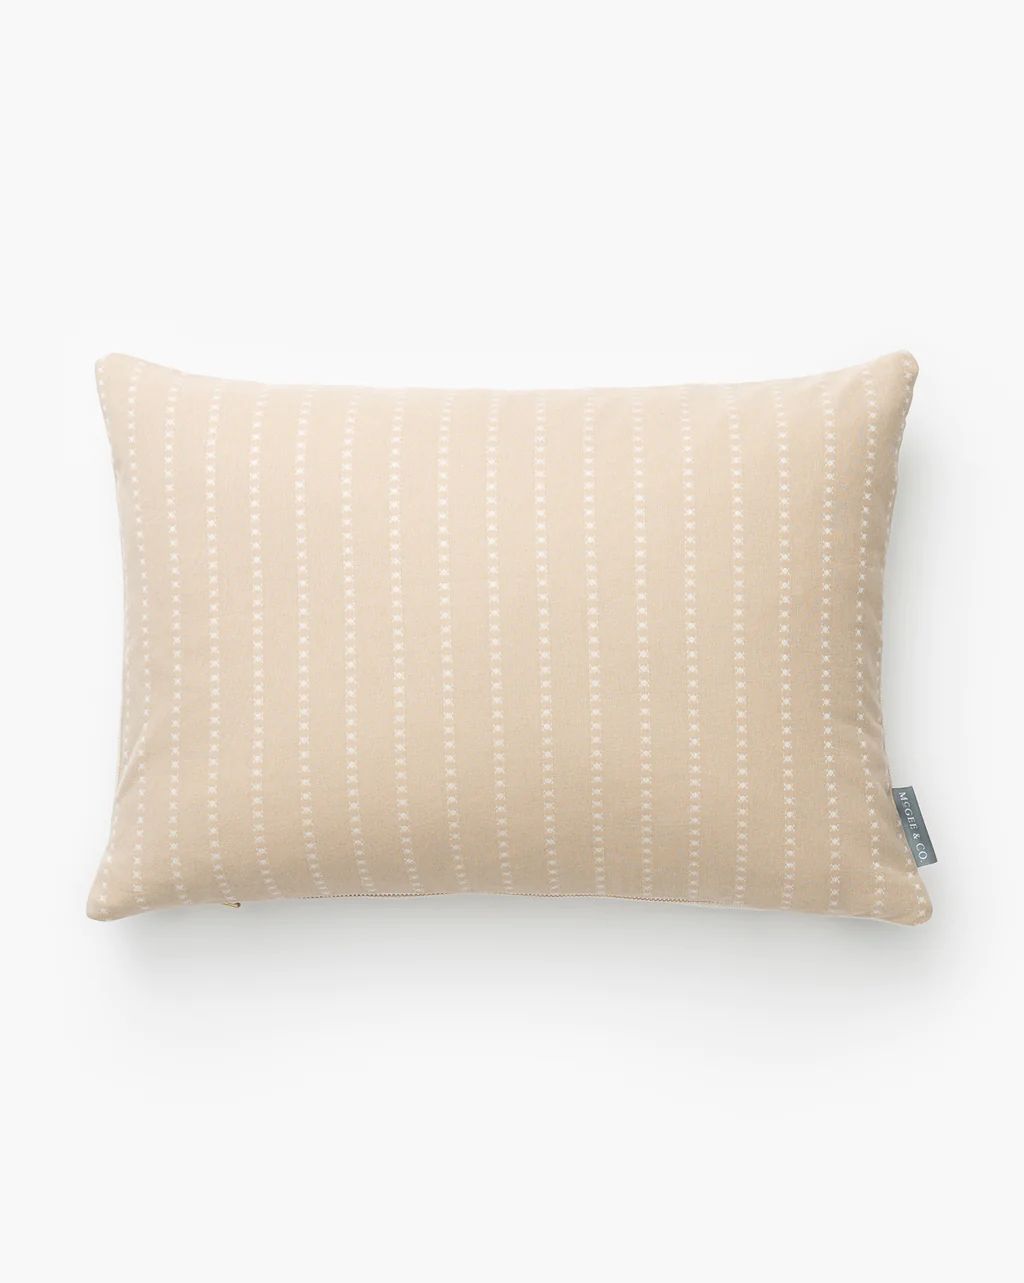 Vintage Taupe Stripe Pillow Cover No. 3 | McGee & Co.